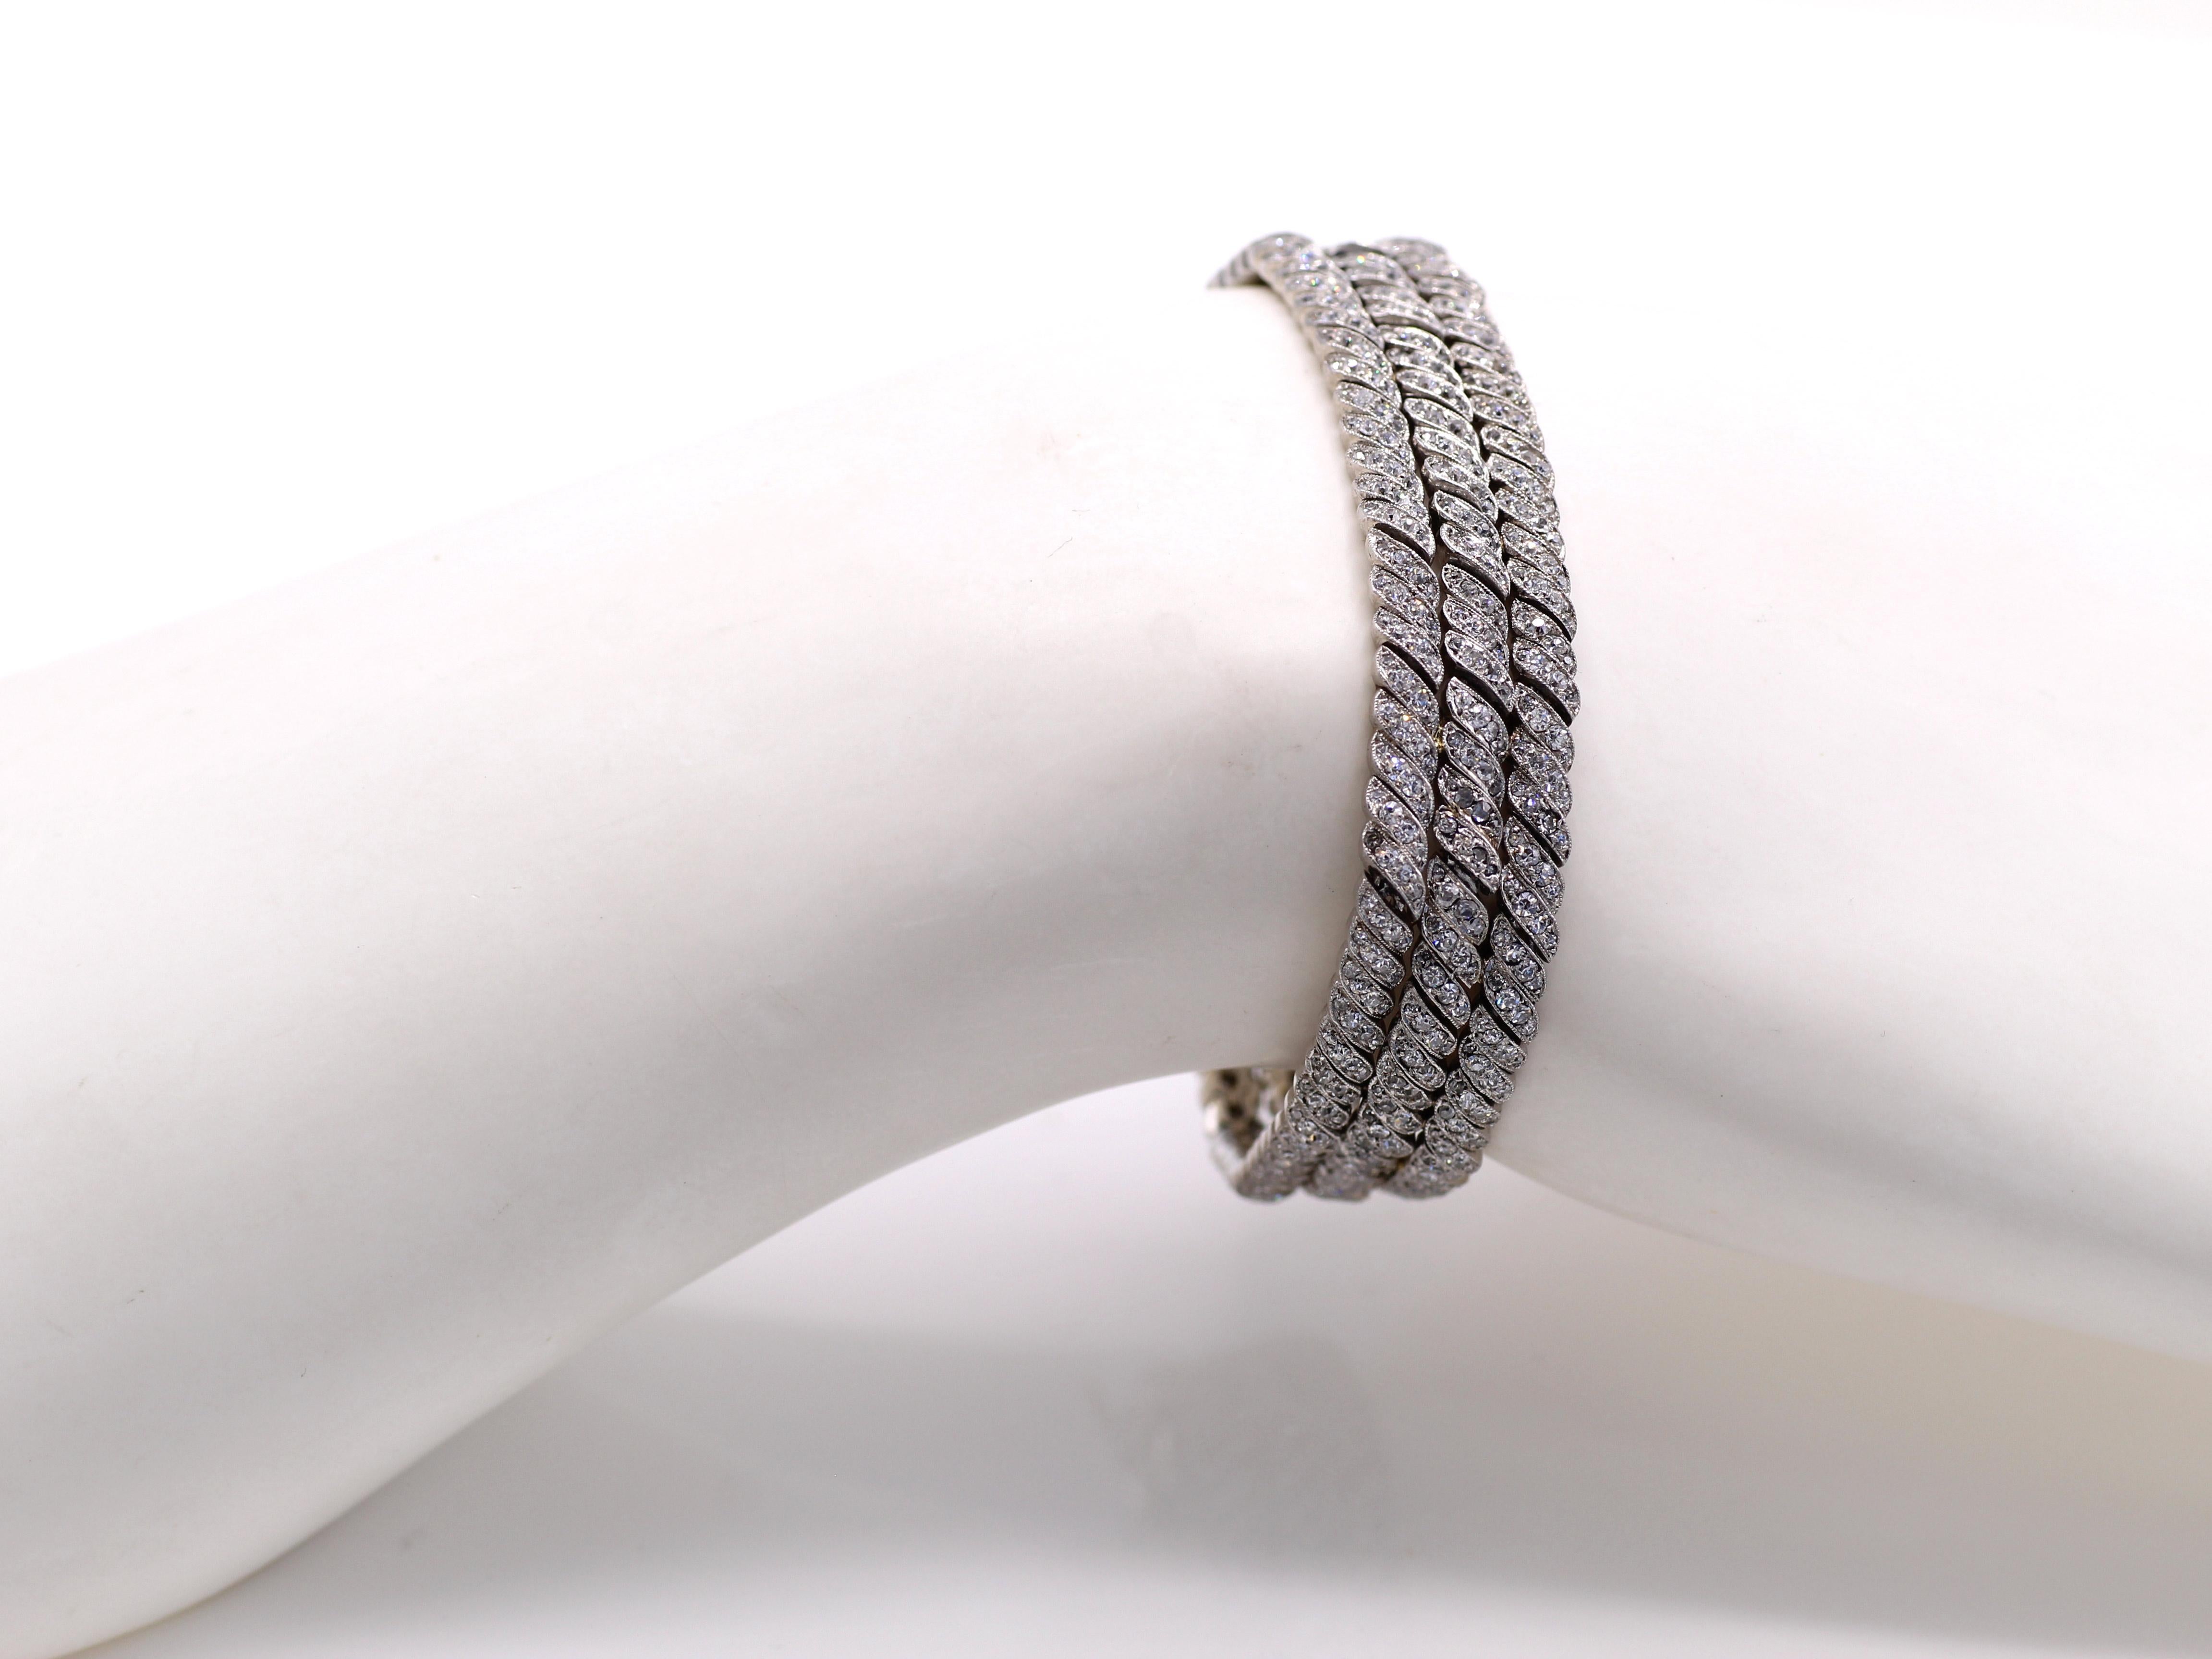 This beautifully designed and masterfully handcrafted French Edwardian bracelet from ca 1915 is composed of 201 scallop shaped flexible elements, each set with 4 small round old cut diamonds. All set in platinum with fine milligrain worked on the